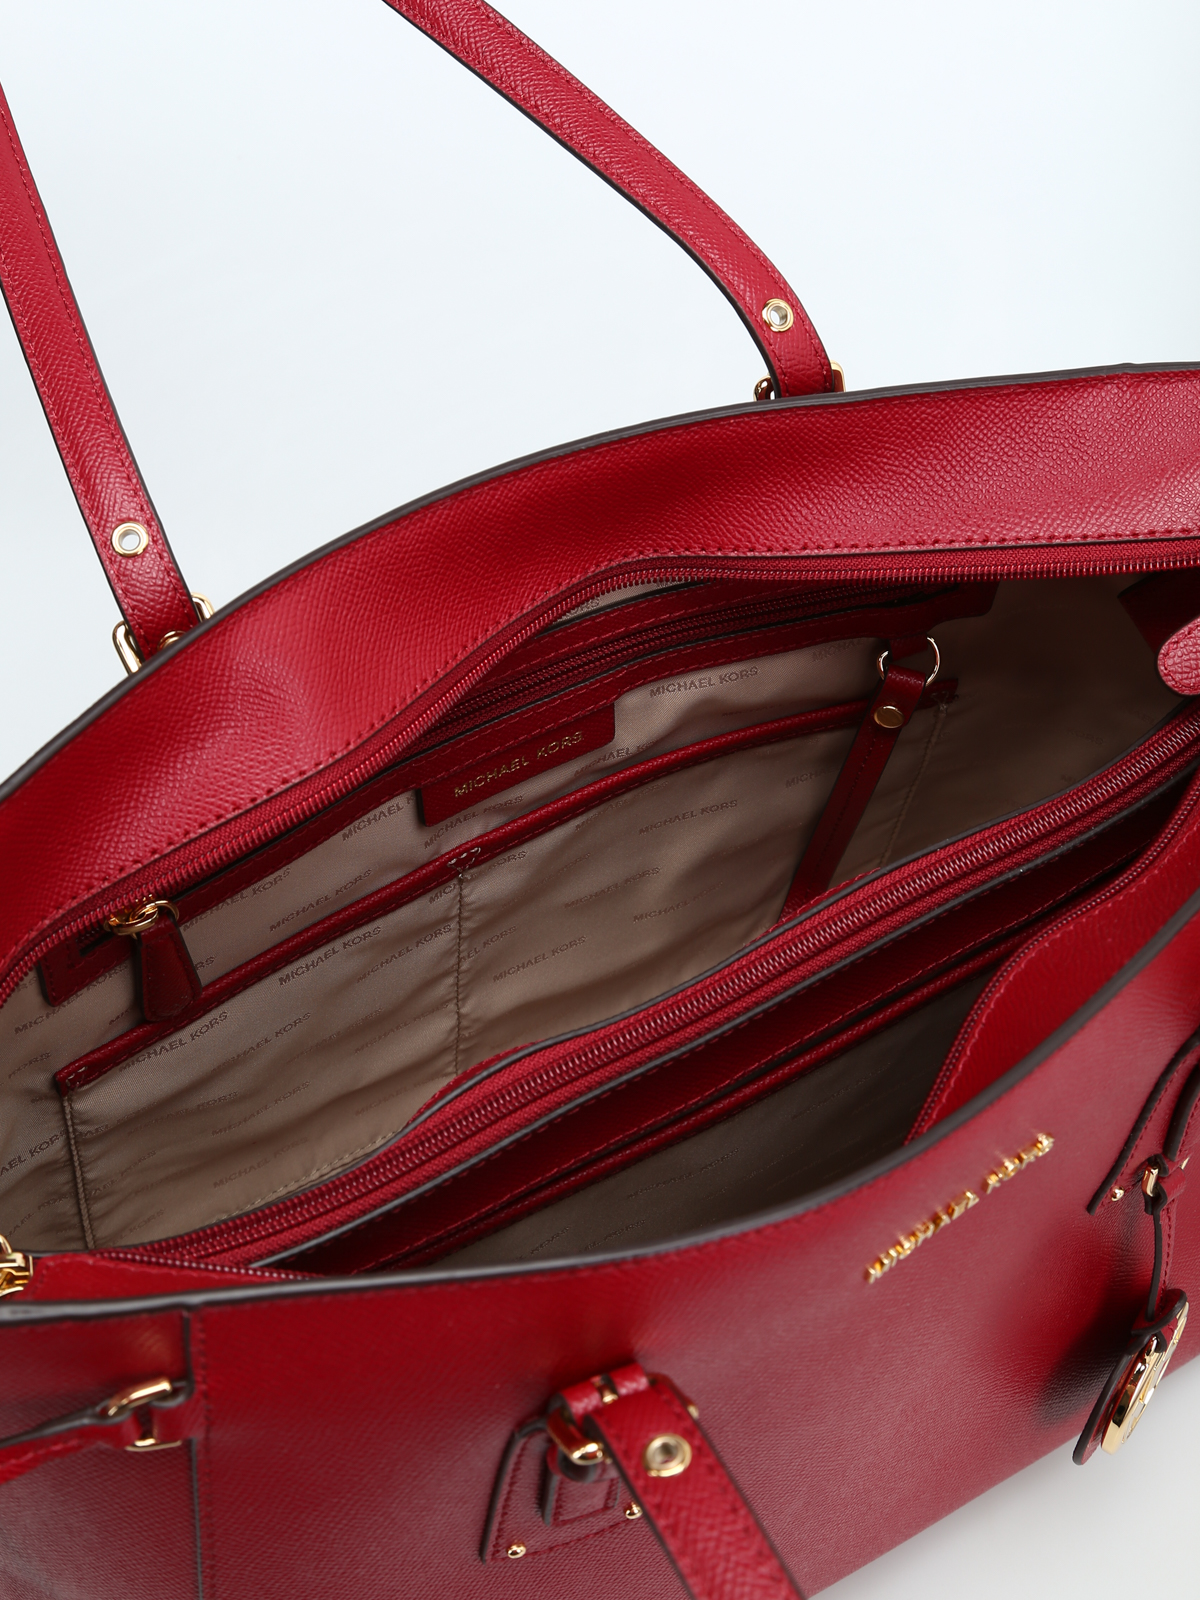 michael kors voyager tote red